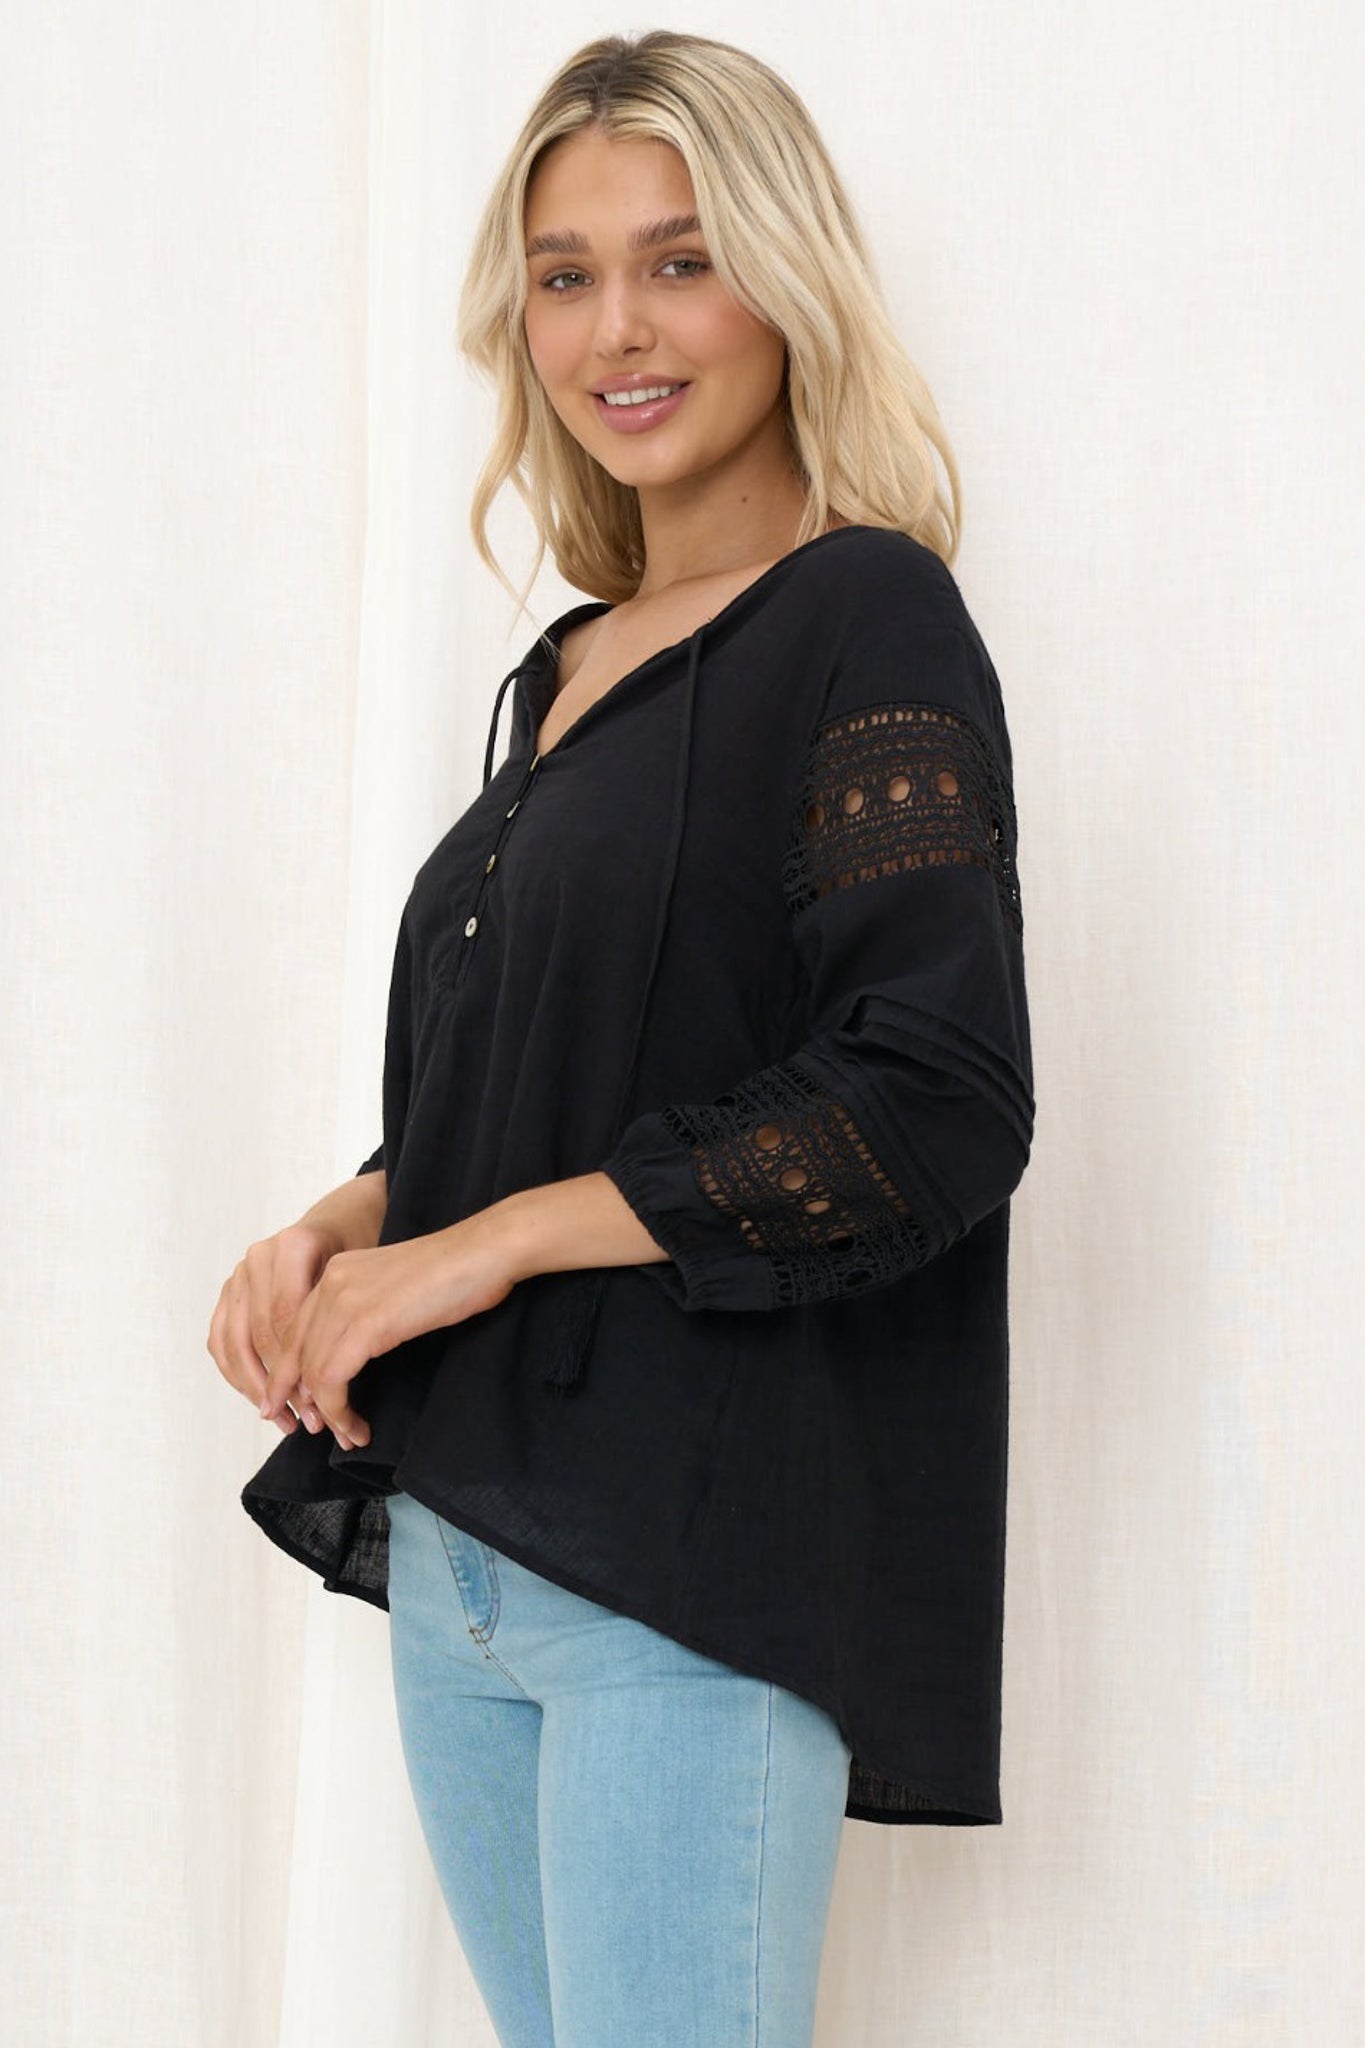 Susette Top - Buttoned Down Lace Insert Detailing Long Sleeve Top in Black